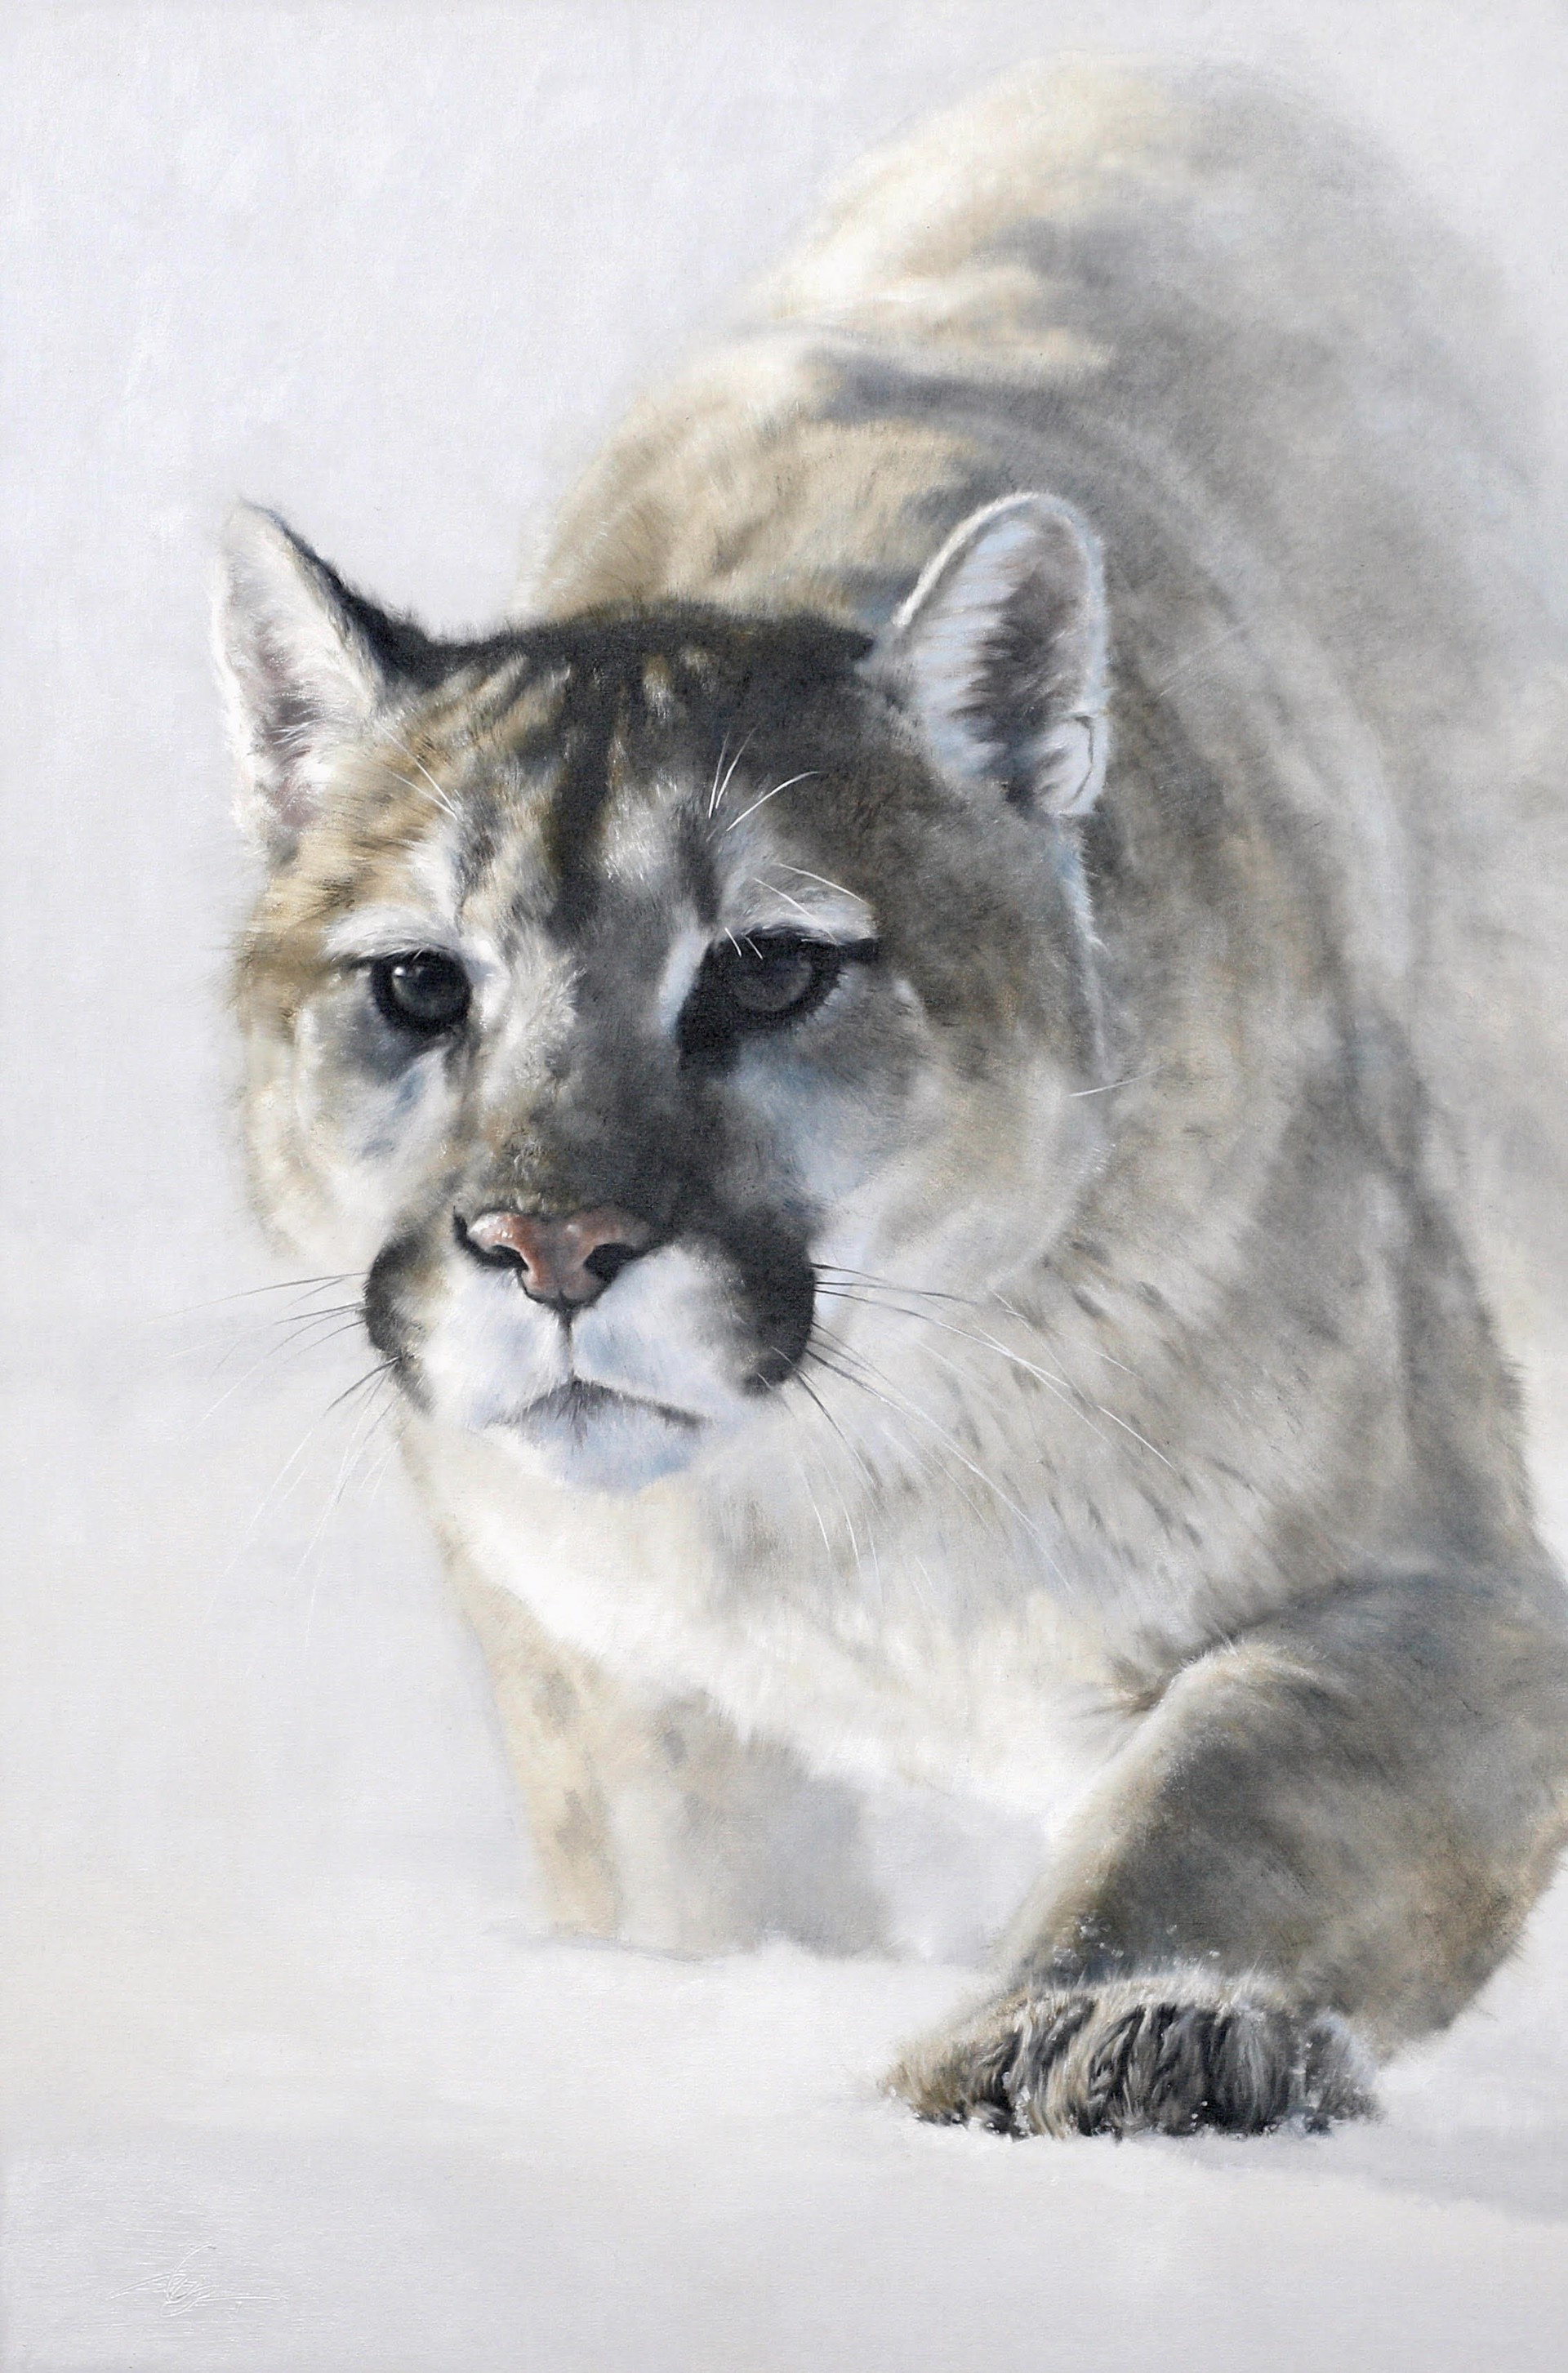 Original Oil Painting Featuring A Cougar Stalking Through Snowy White Background